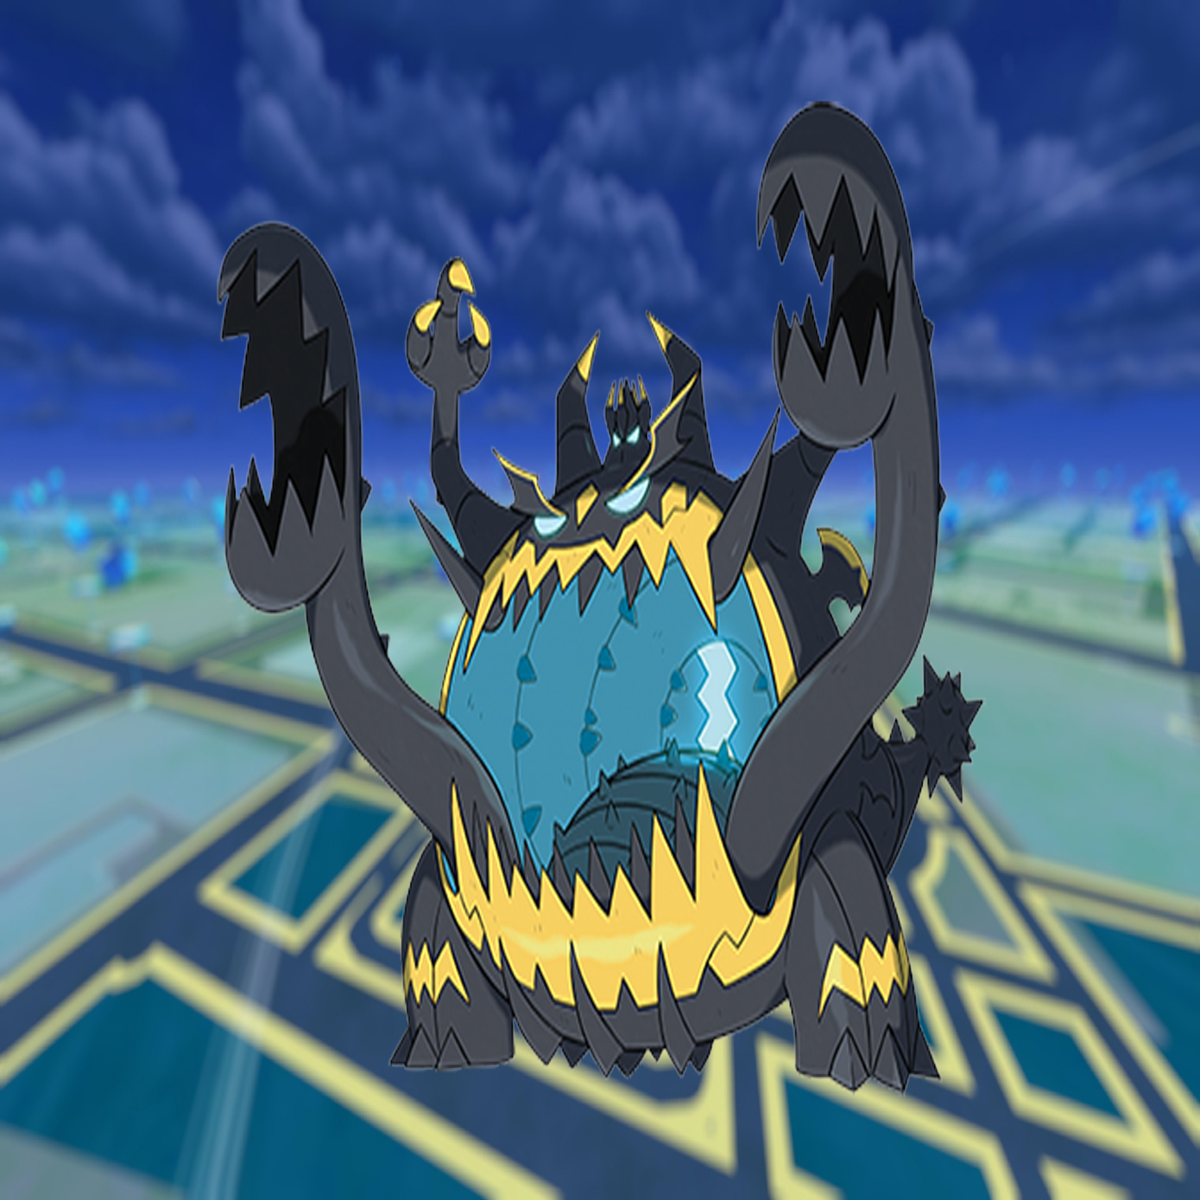 If you see a Guzzlord, do NOT get into its mouth. 👀 #PokemonGO